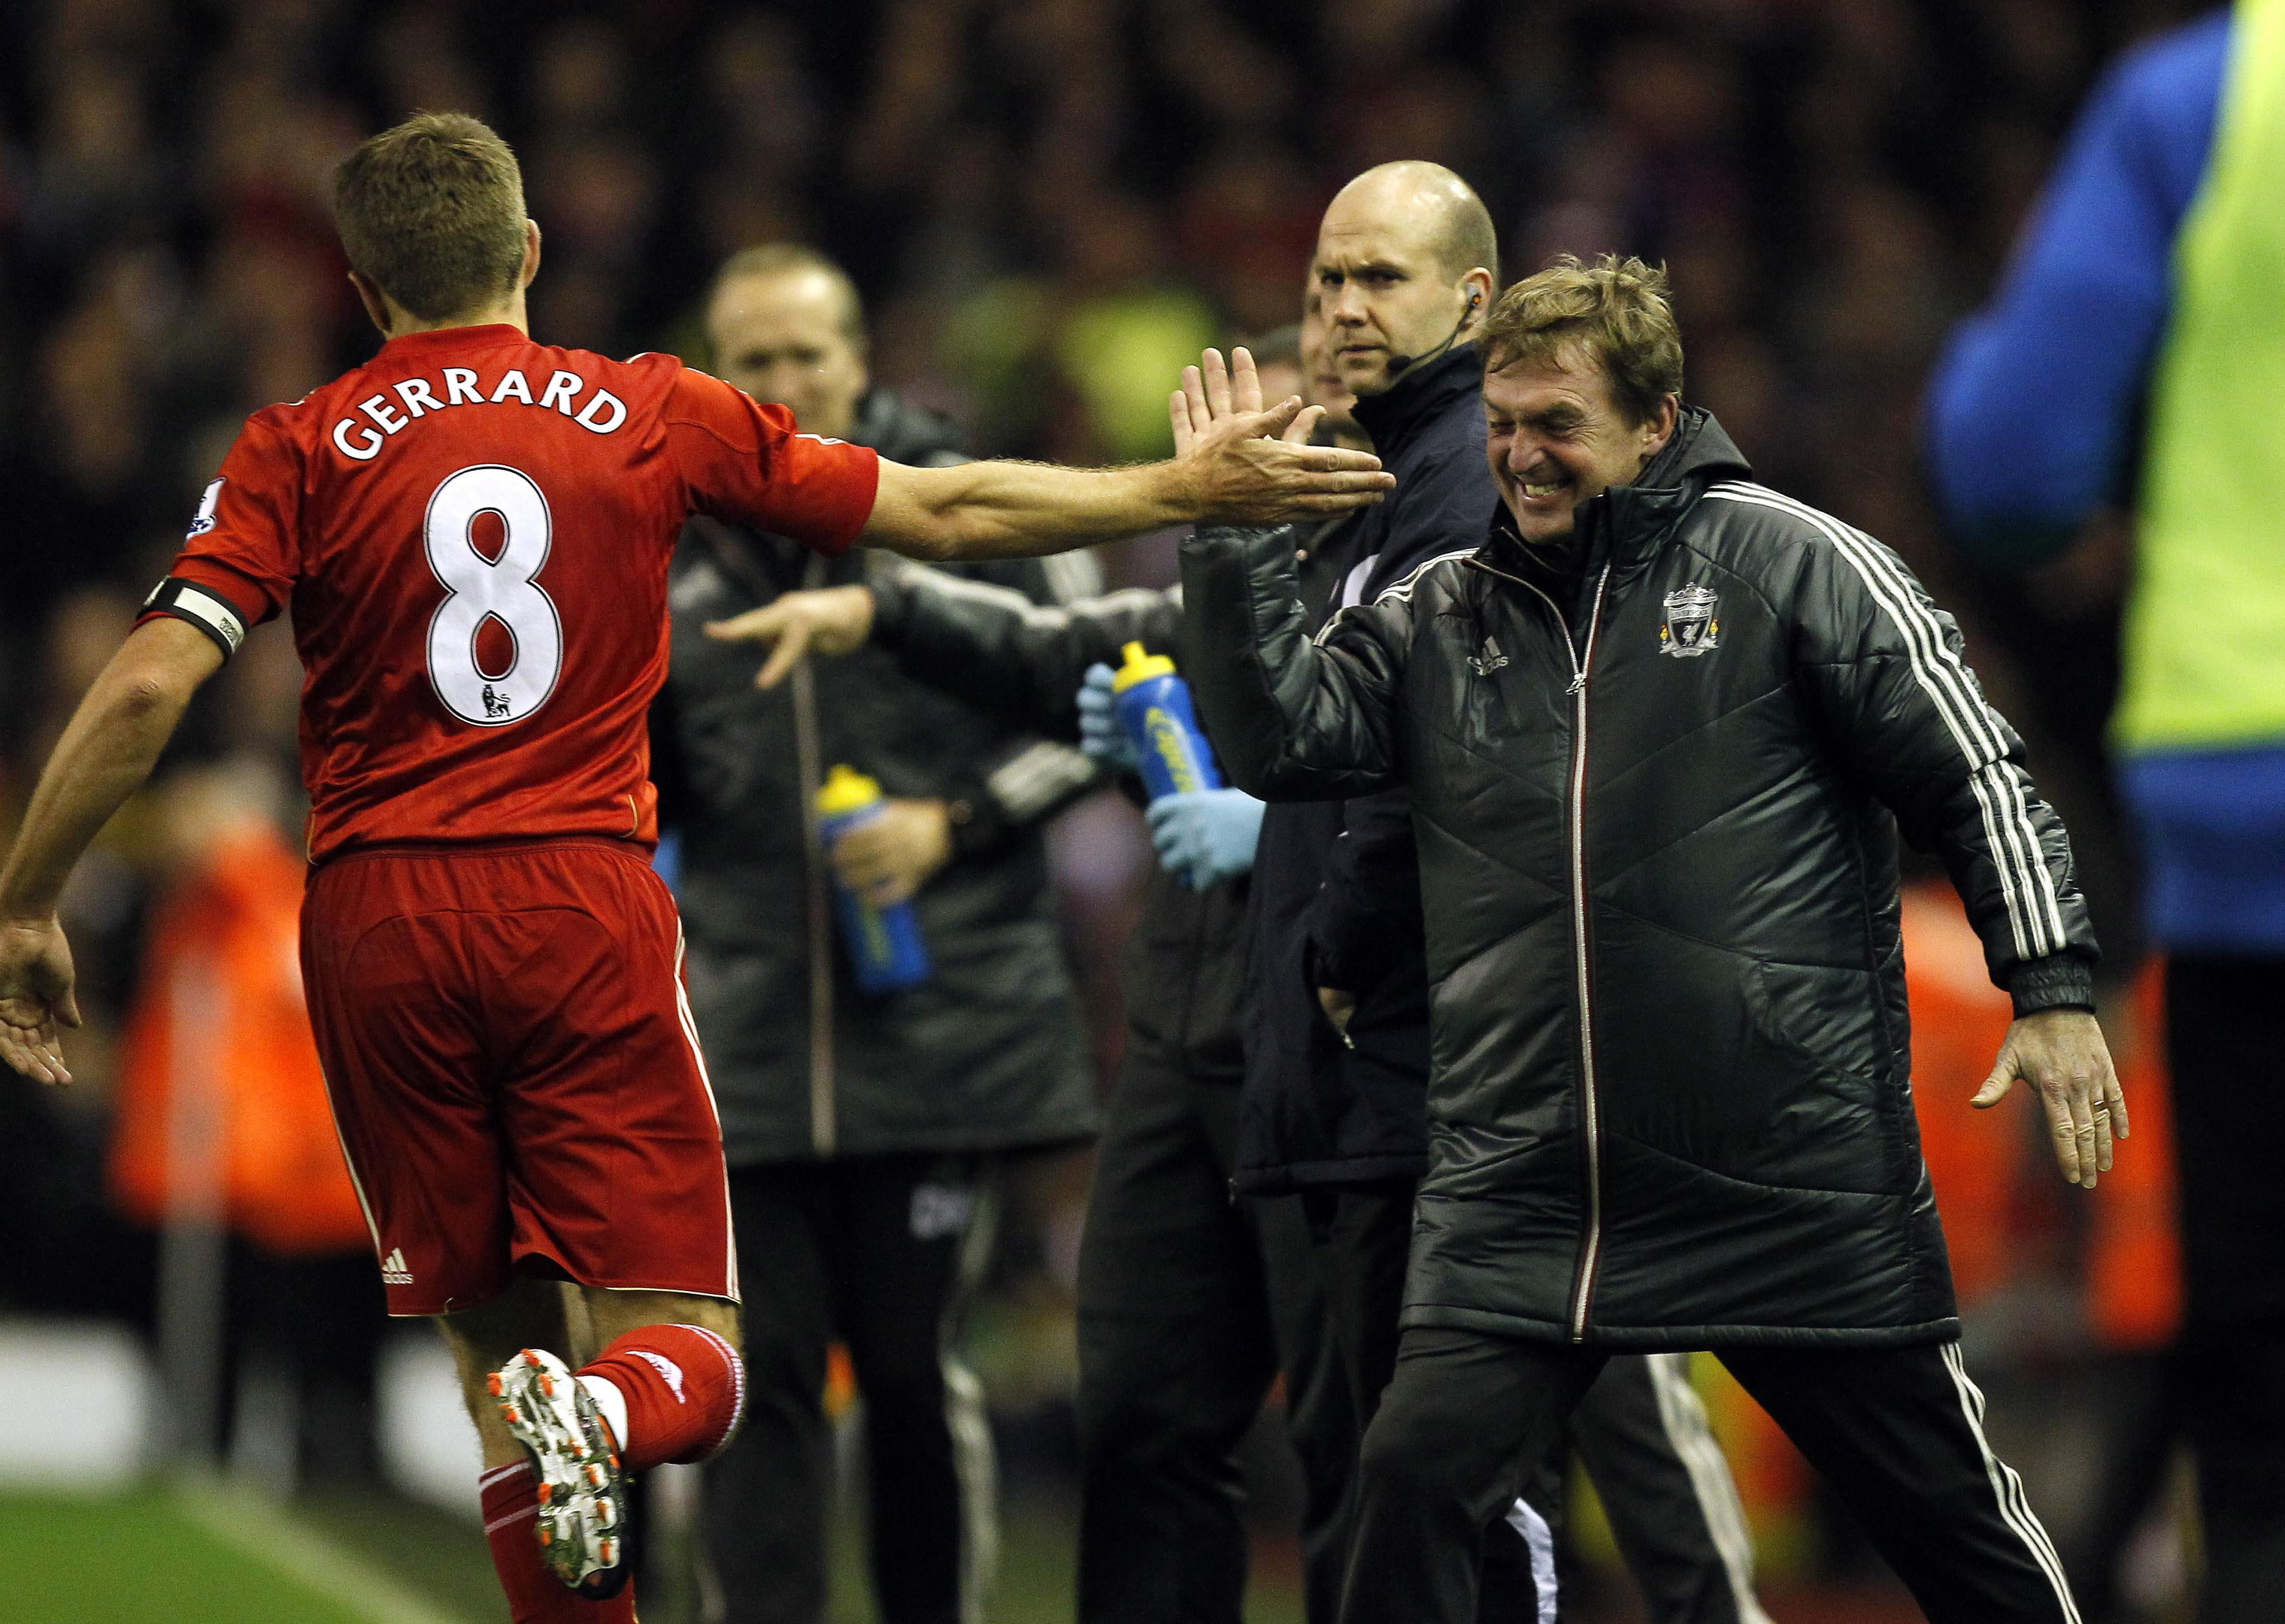 Liverpool's Steven Gerrard celebrates with manager Kenny Dalglish during a Premier League match at Anfield (PA Archive)